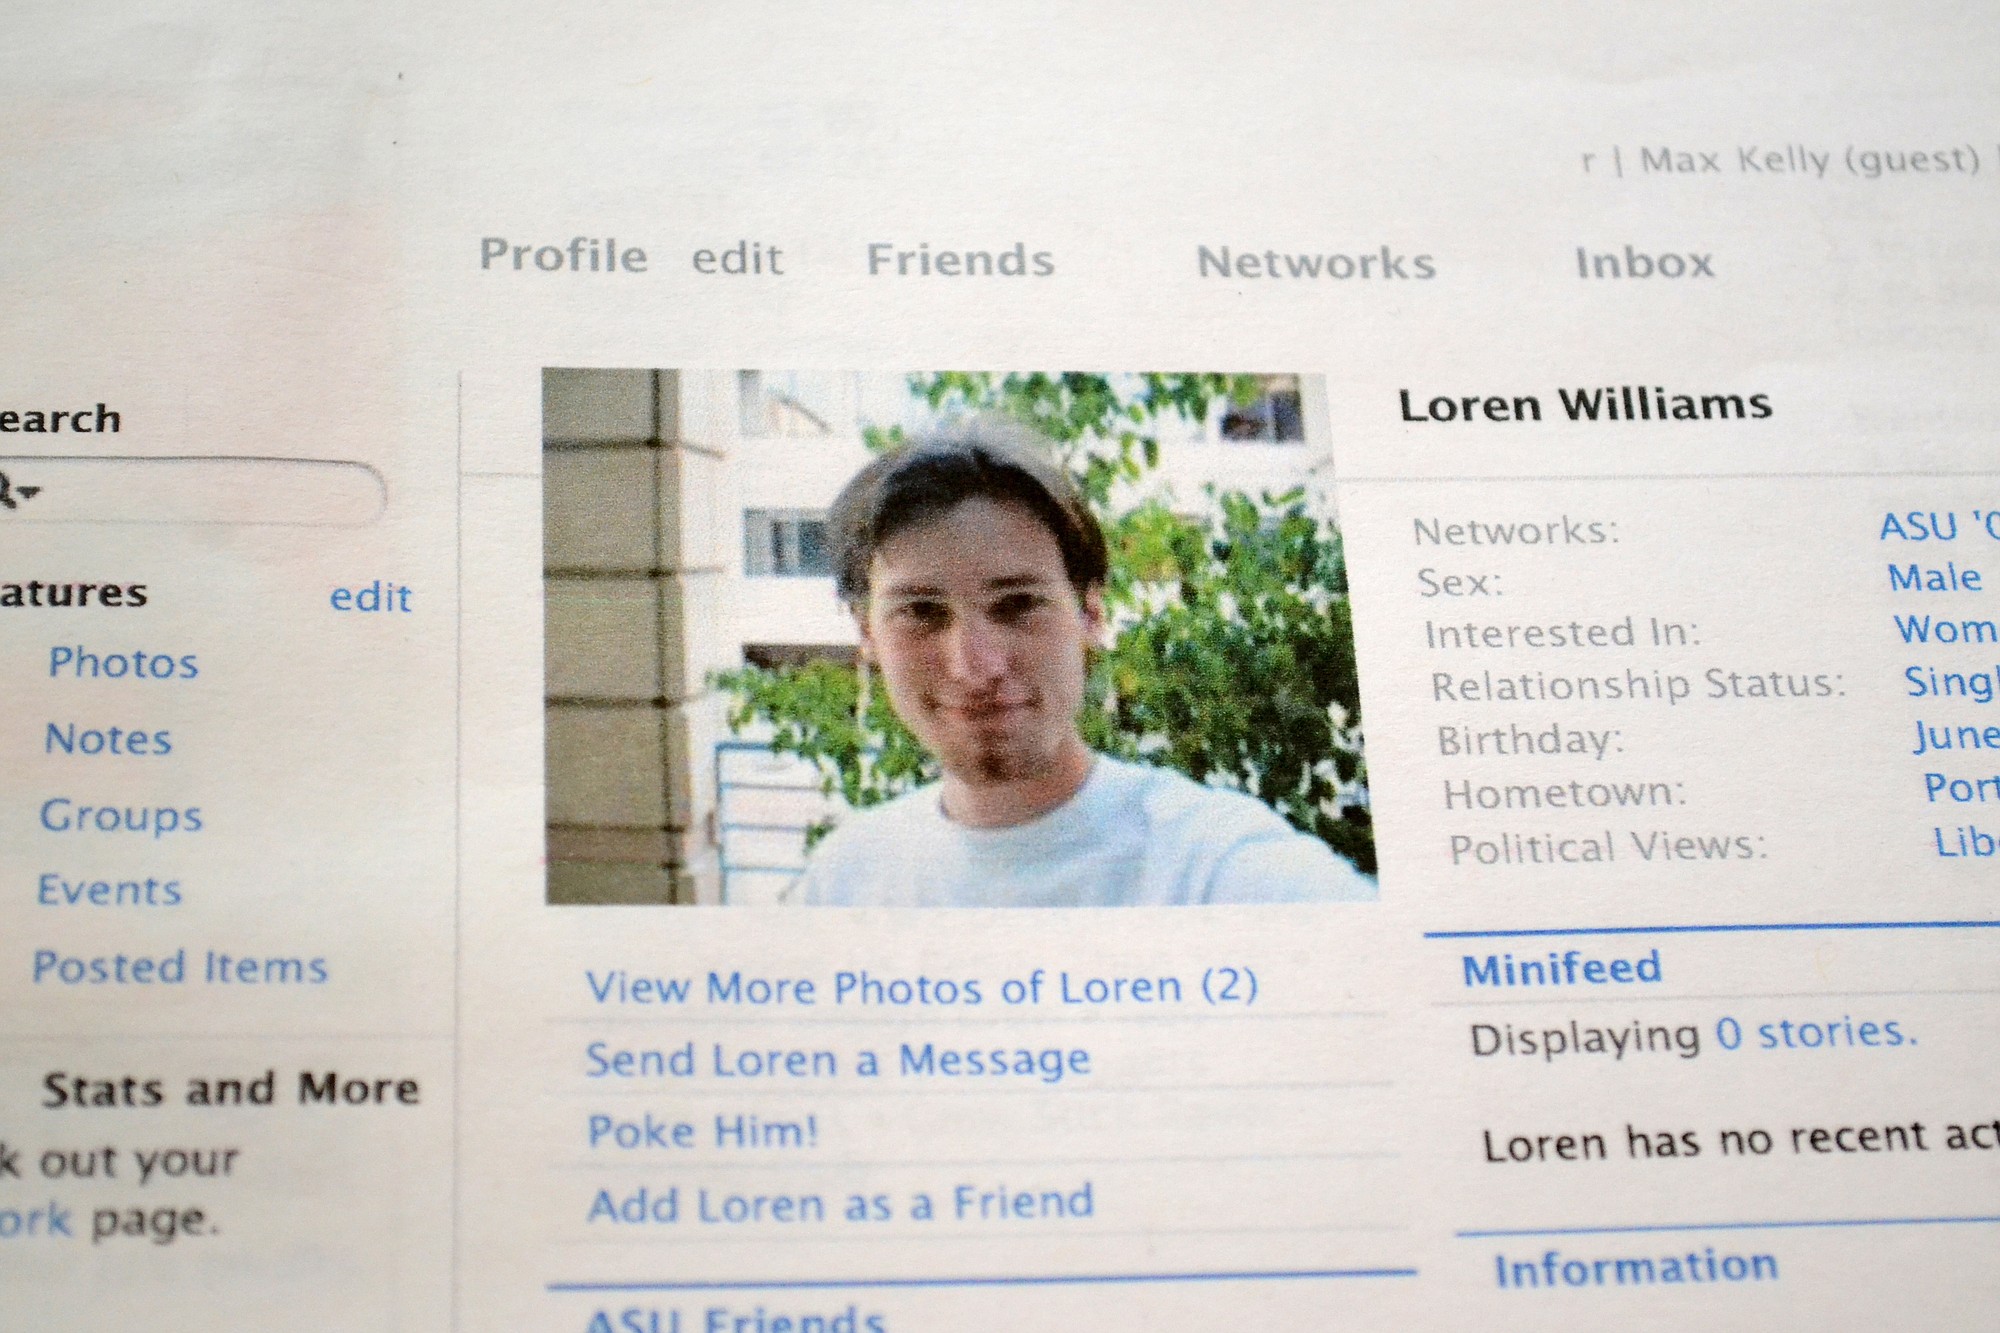 Karen Williams of Beaverton, Ore., sued Facebook for access to her son Loren's account after he died in a 2005 motorcycle accident at the age of 22.